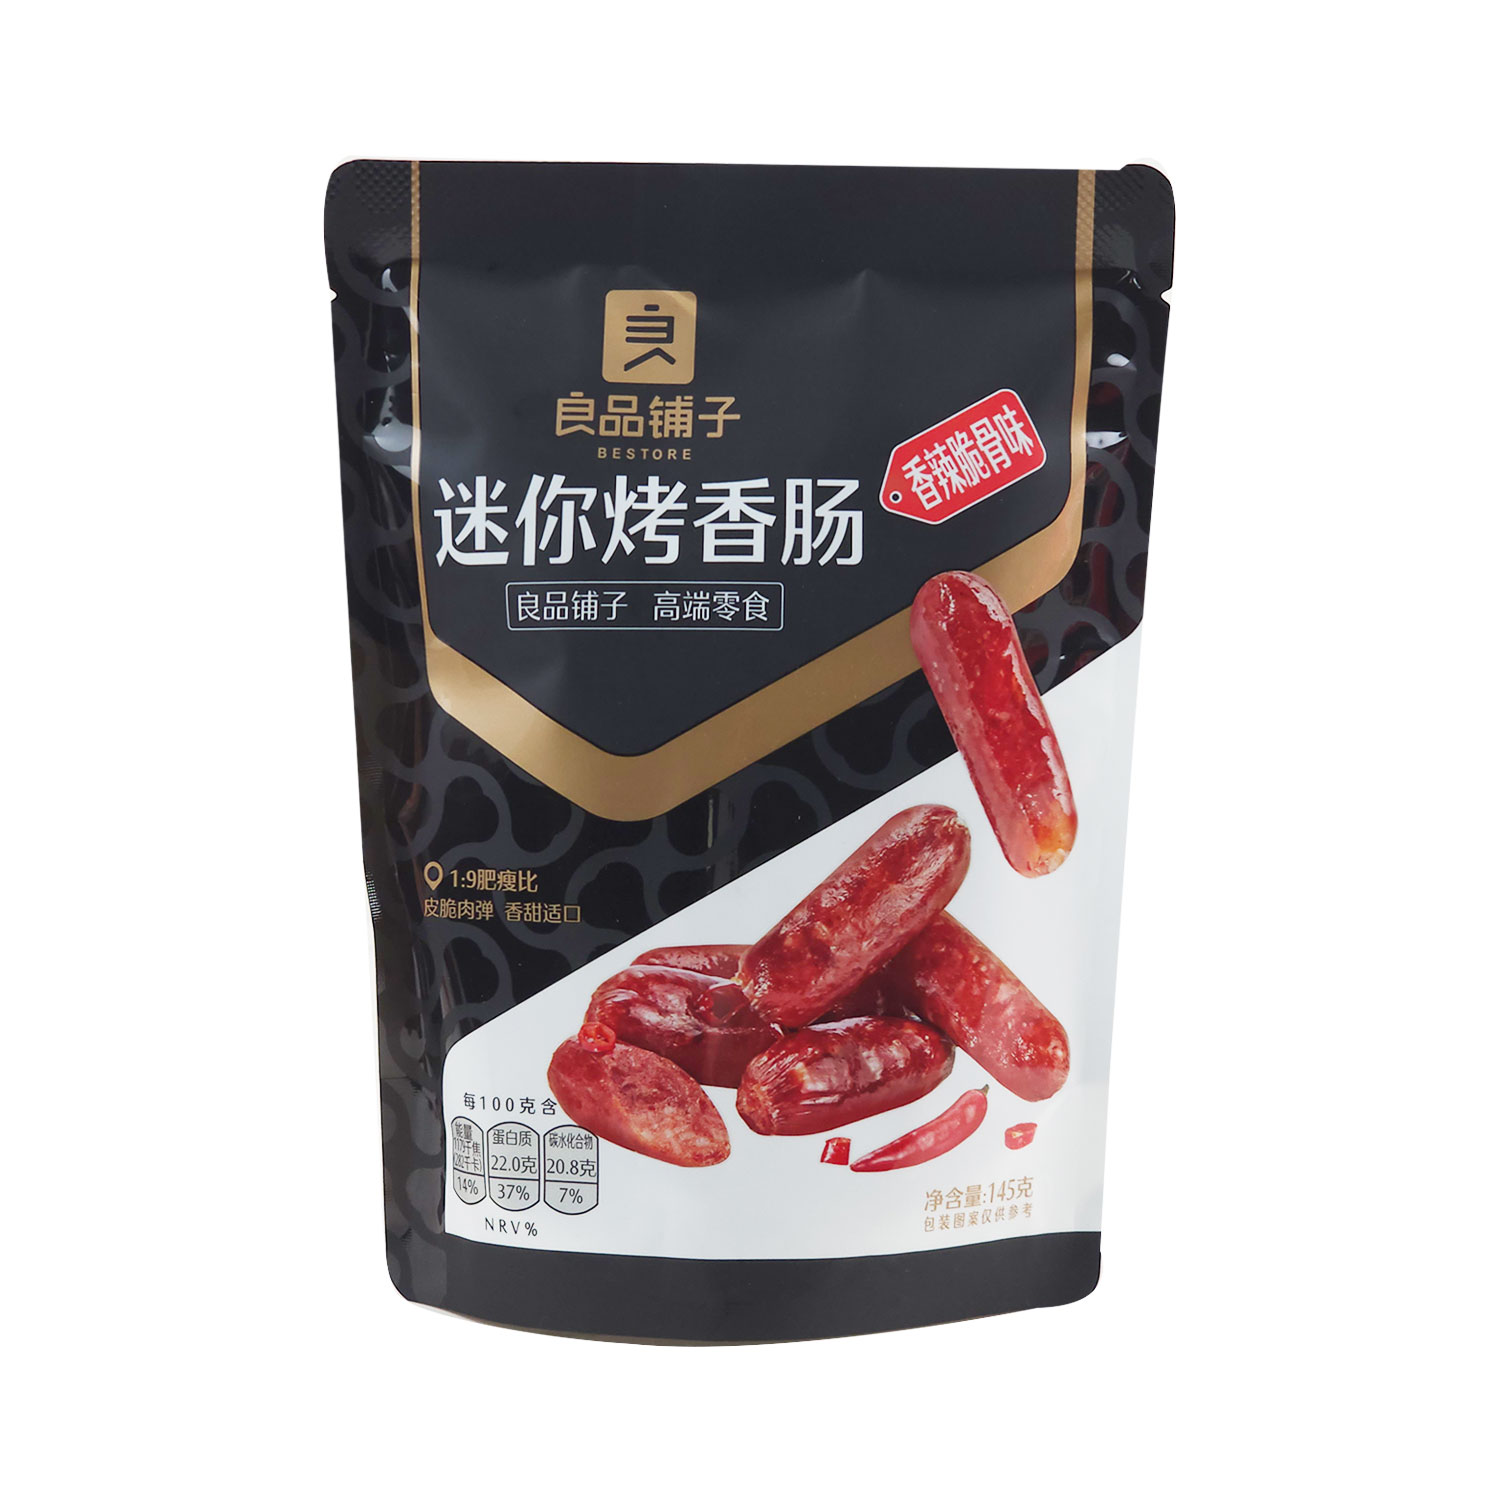 Bestore Mini Grilled Sausage Spicy Crispy Bone Flavour 145g-eBest-Jerky,Snacks & Confectionery